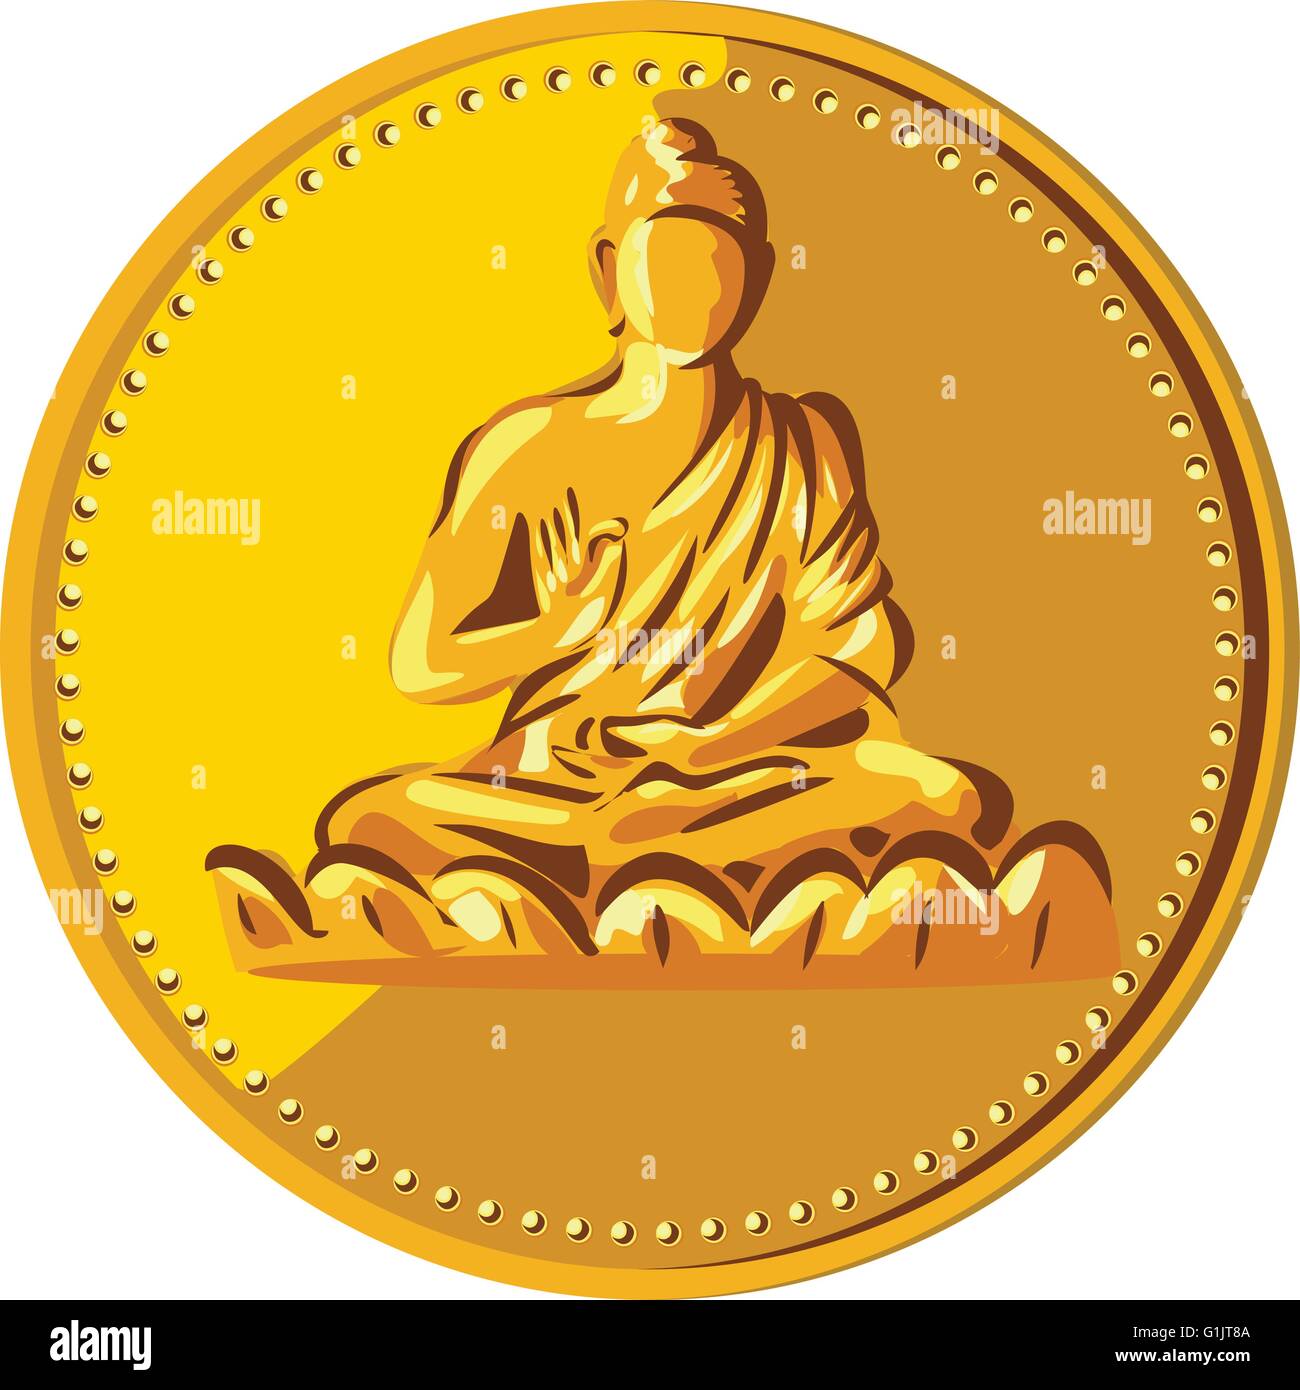 Illustration of a gold coin medallion showing silhouette of Gautama Buddha, Siddhārtha Gautama, Shakyamuni Buddha in lotus position viewed from front done in retro style. Stock Vector